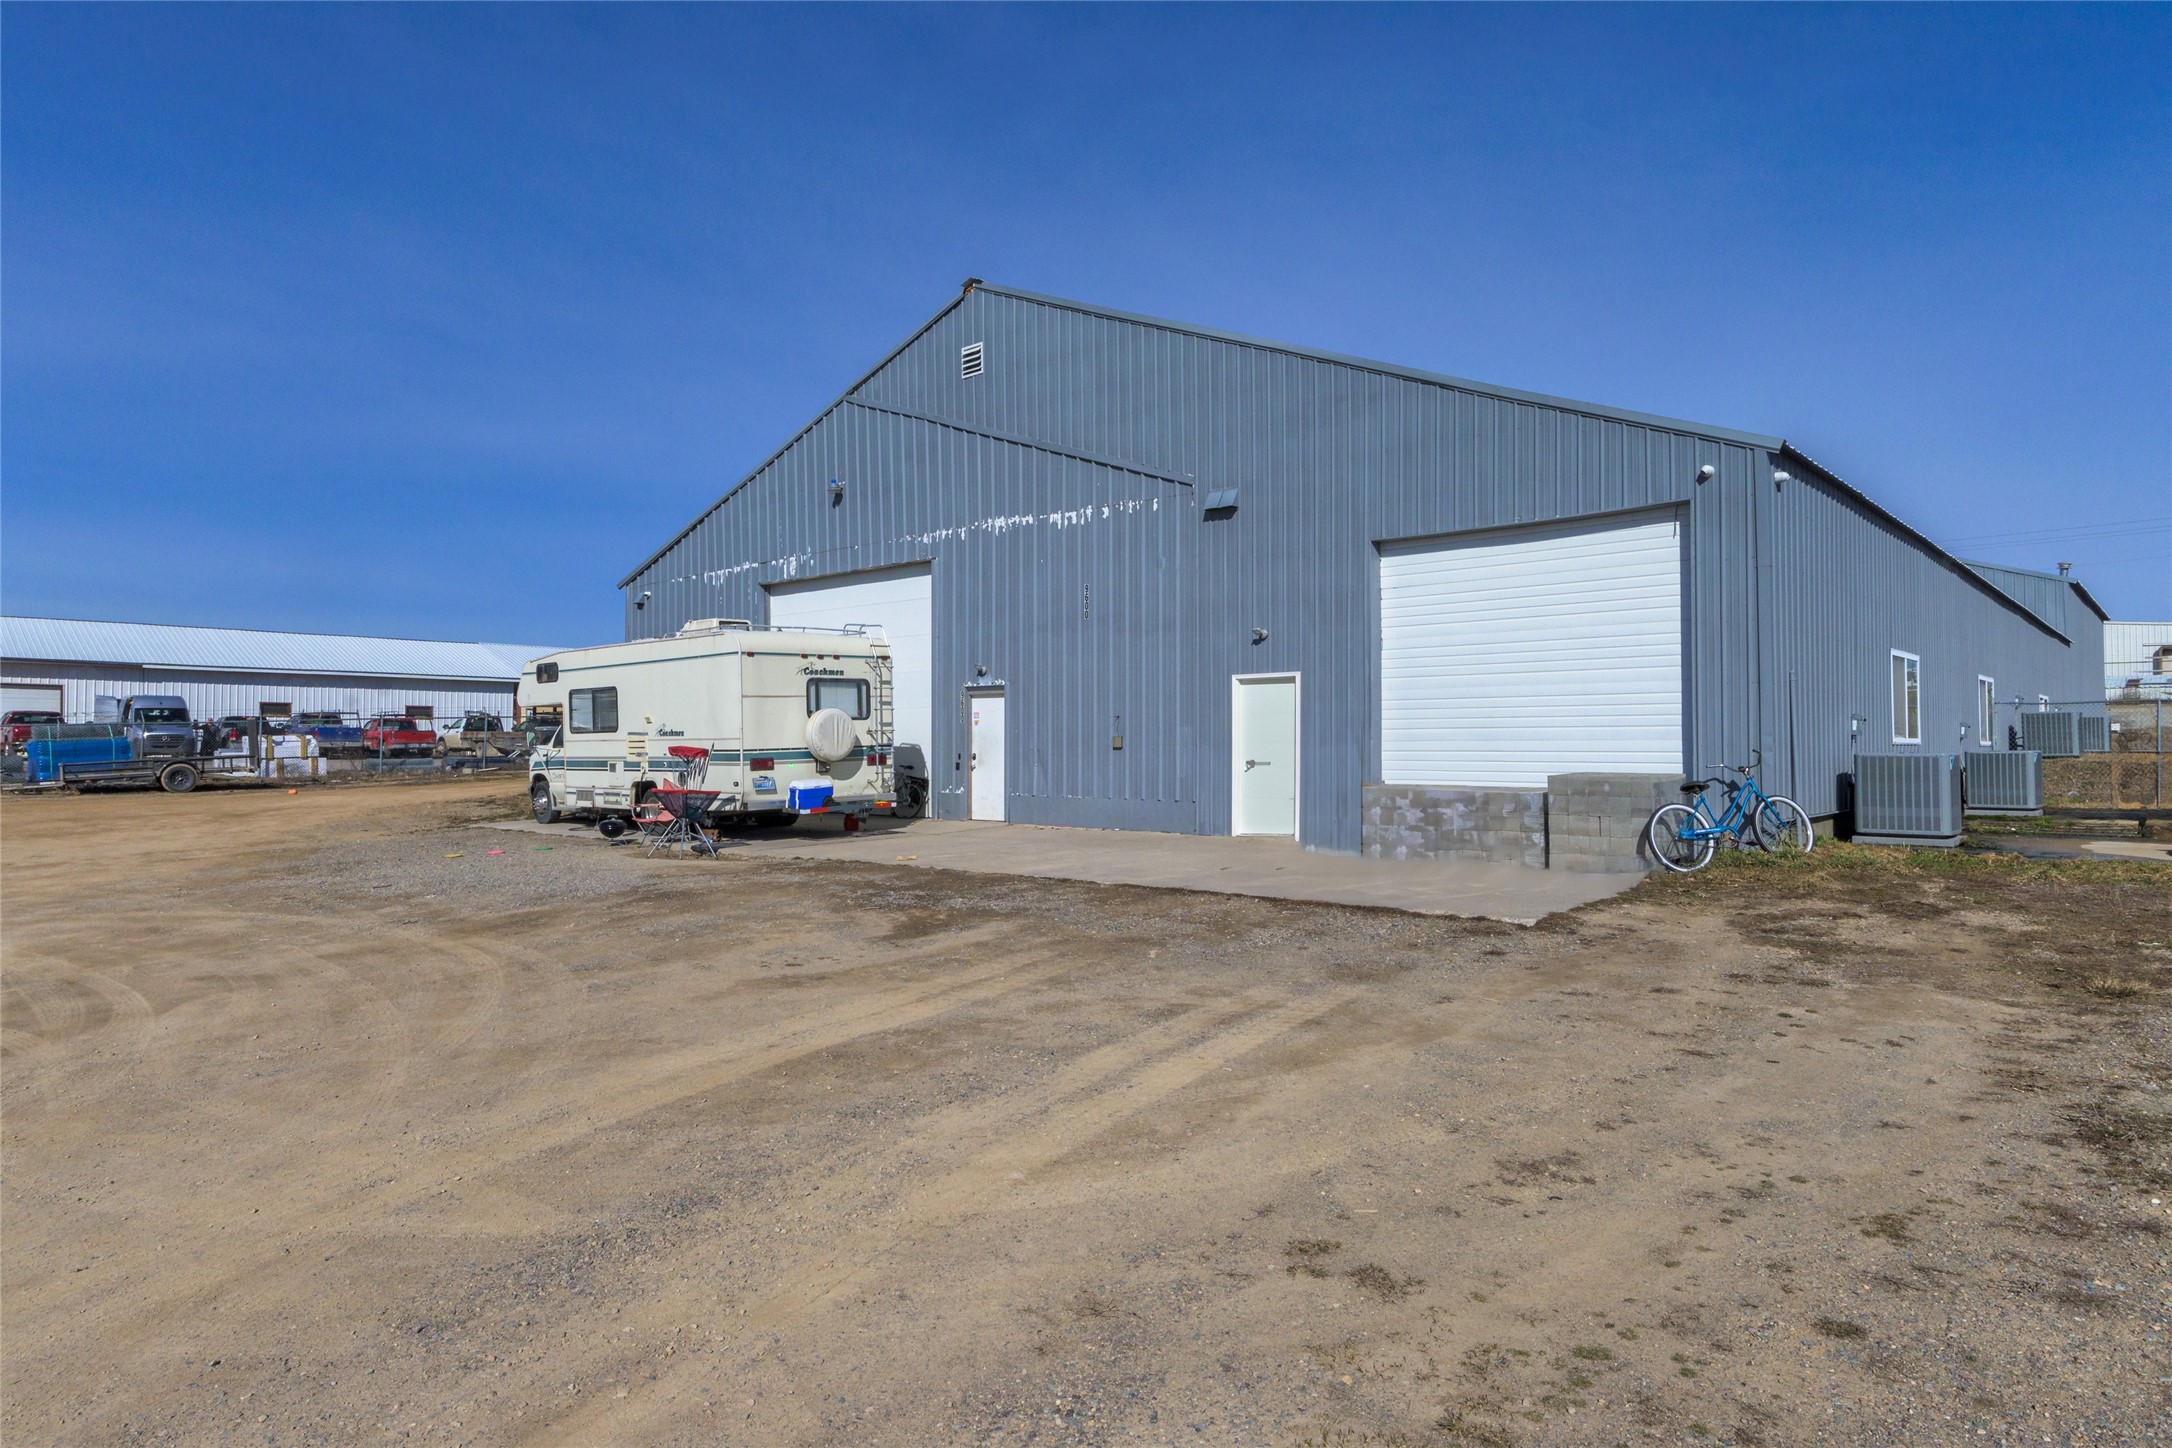 Warehouse Investment Opportunity. Over 11,000 SF on 0.9 acres. Zoned CI-1. The warehouse portion has 16'+ ceilings. There is an internal truck bay and the back portion of the building is dock height. Currently rented with two Tenants on NNN leases month-to-month. Larger space has AC. Yard is fenced. Offered at $1,750,000. Contact Cecil Waatti 406.809.4000 Al Dunlap 406.649.7035 or your real estate professional.